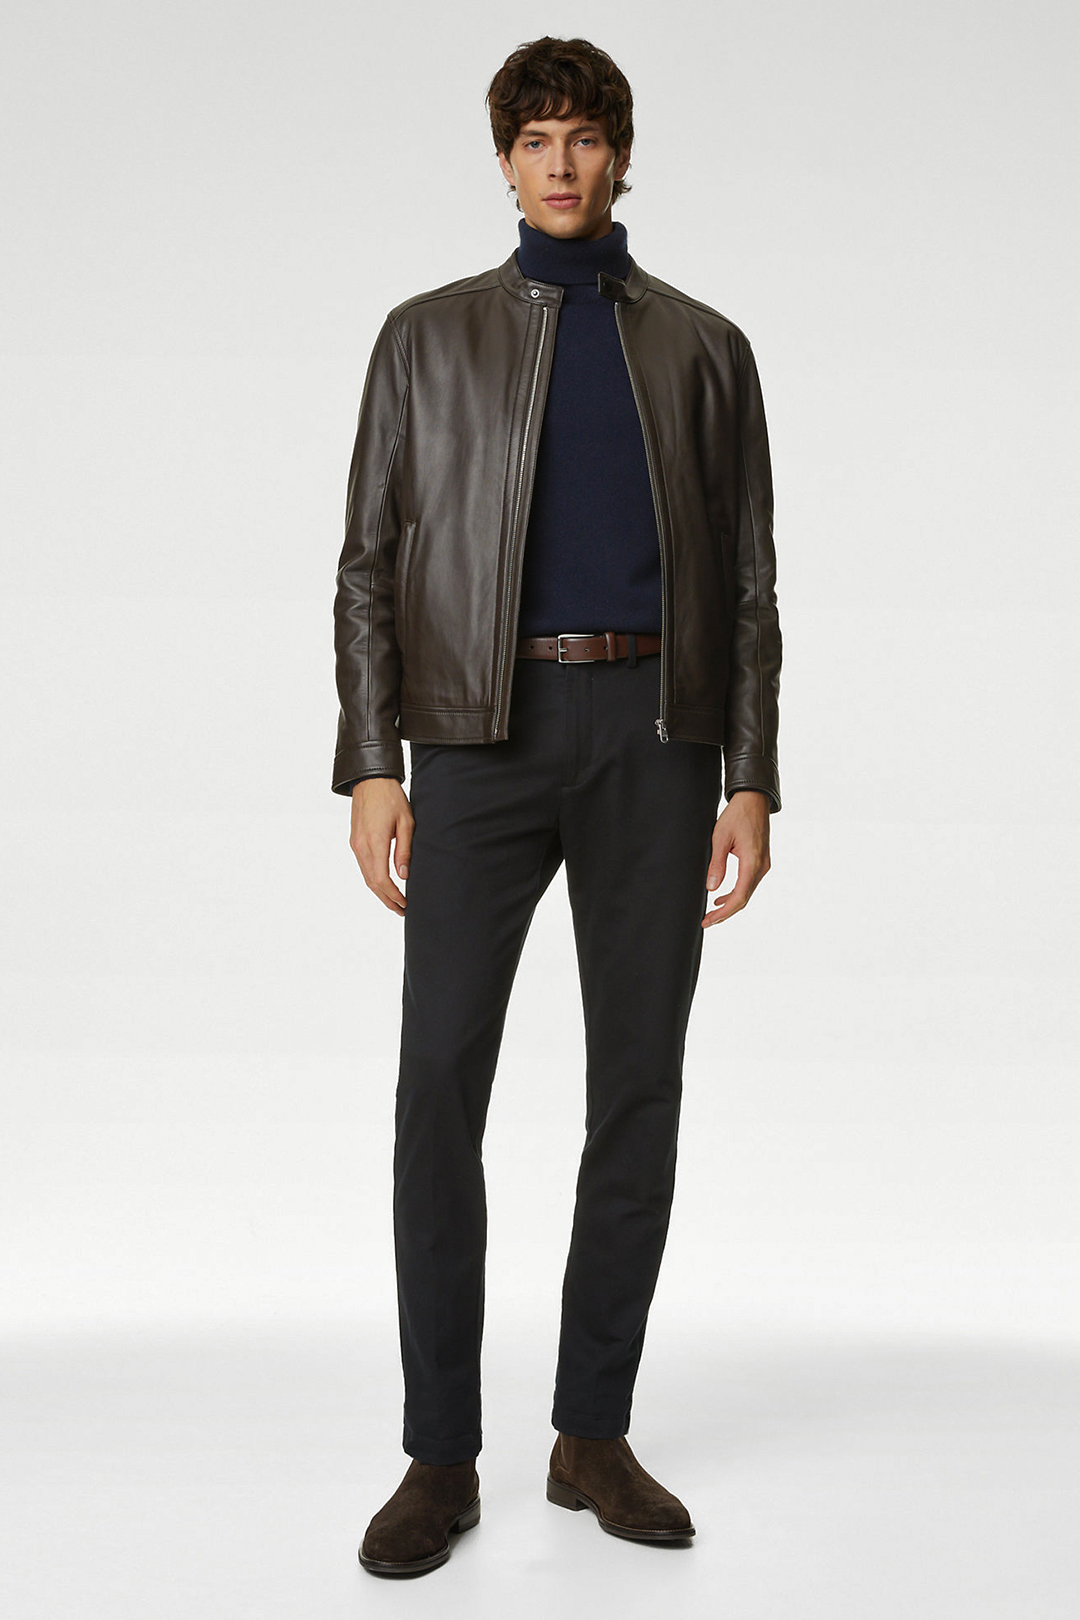 Wearing a brown leather biker jacket, navy turtleneck, black chinos, and dark brown suede Chelsea boots